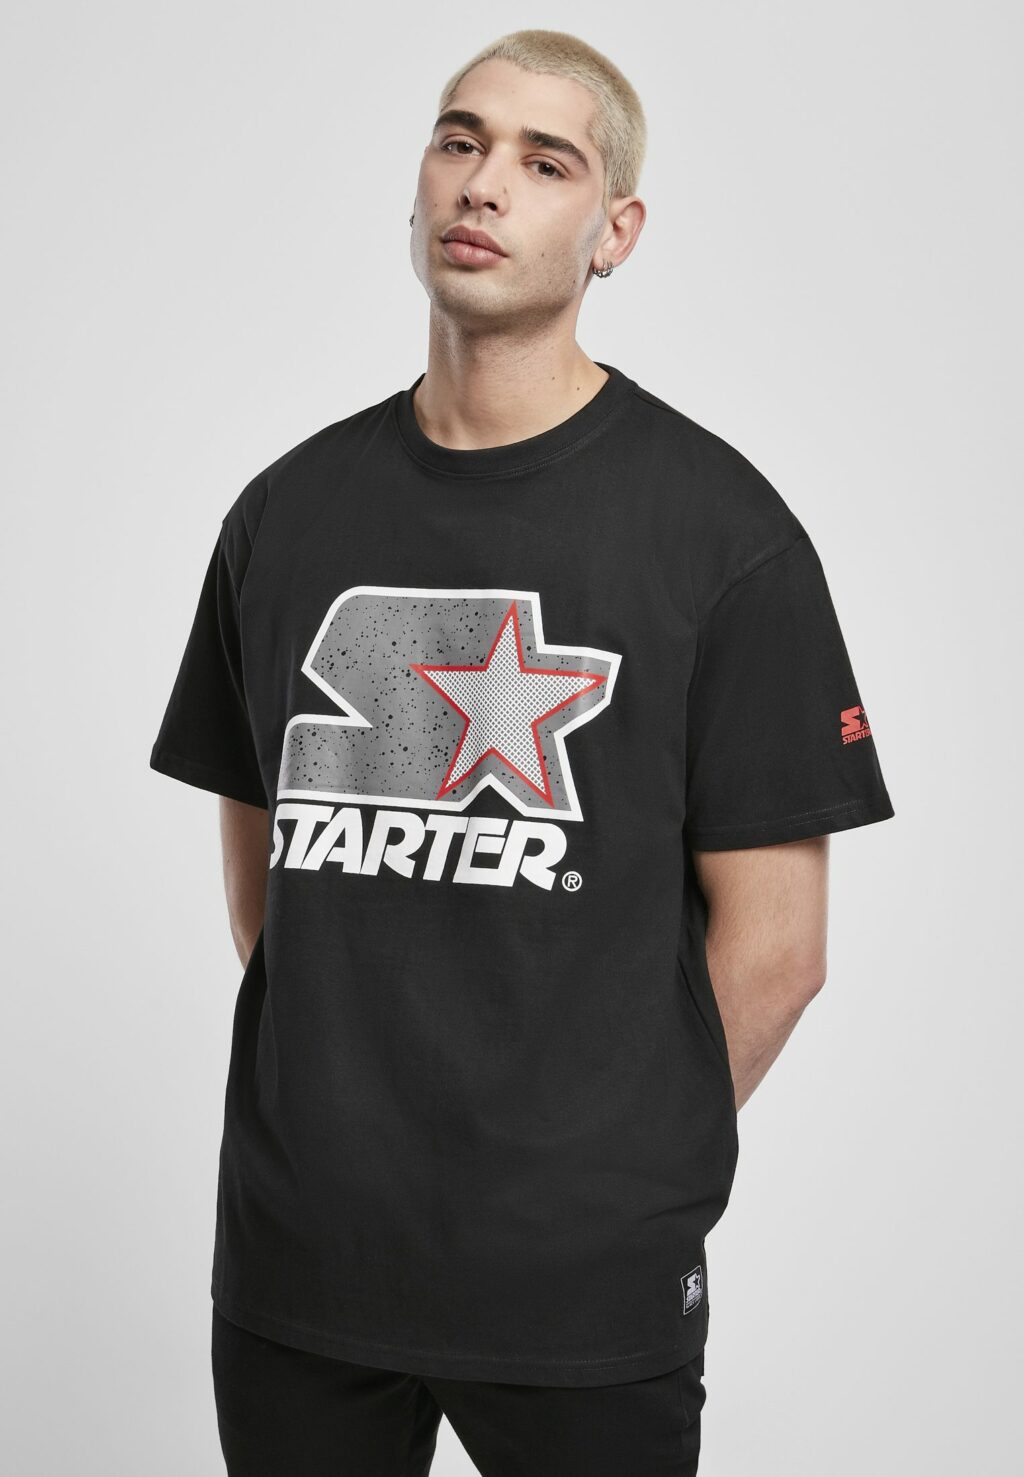 Starter Multicolored Logo Tee blk/gry ST017